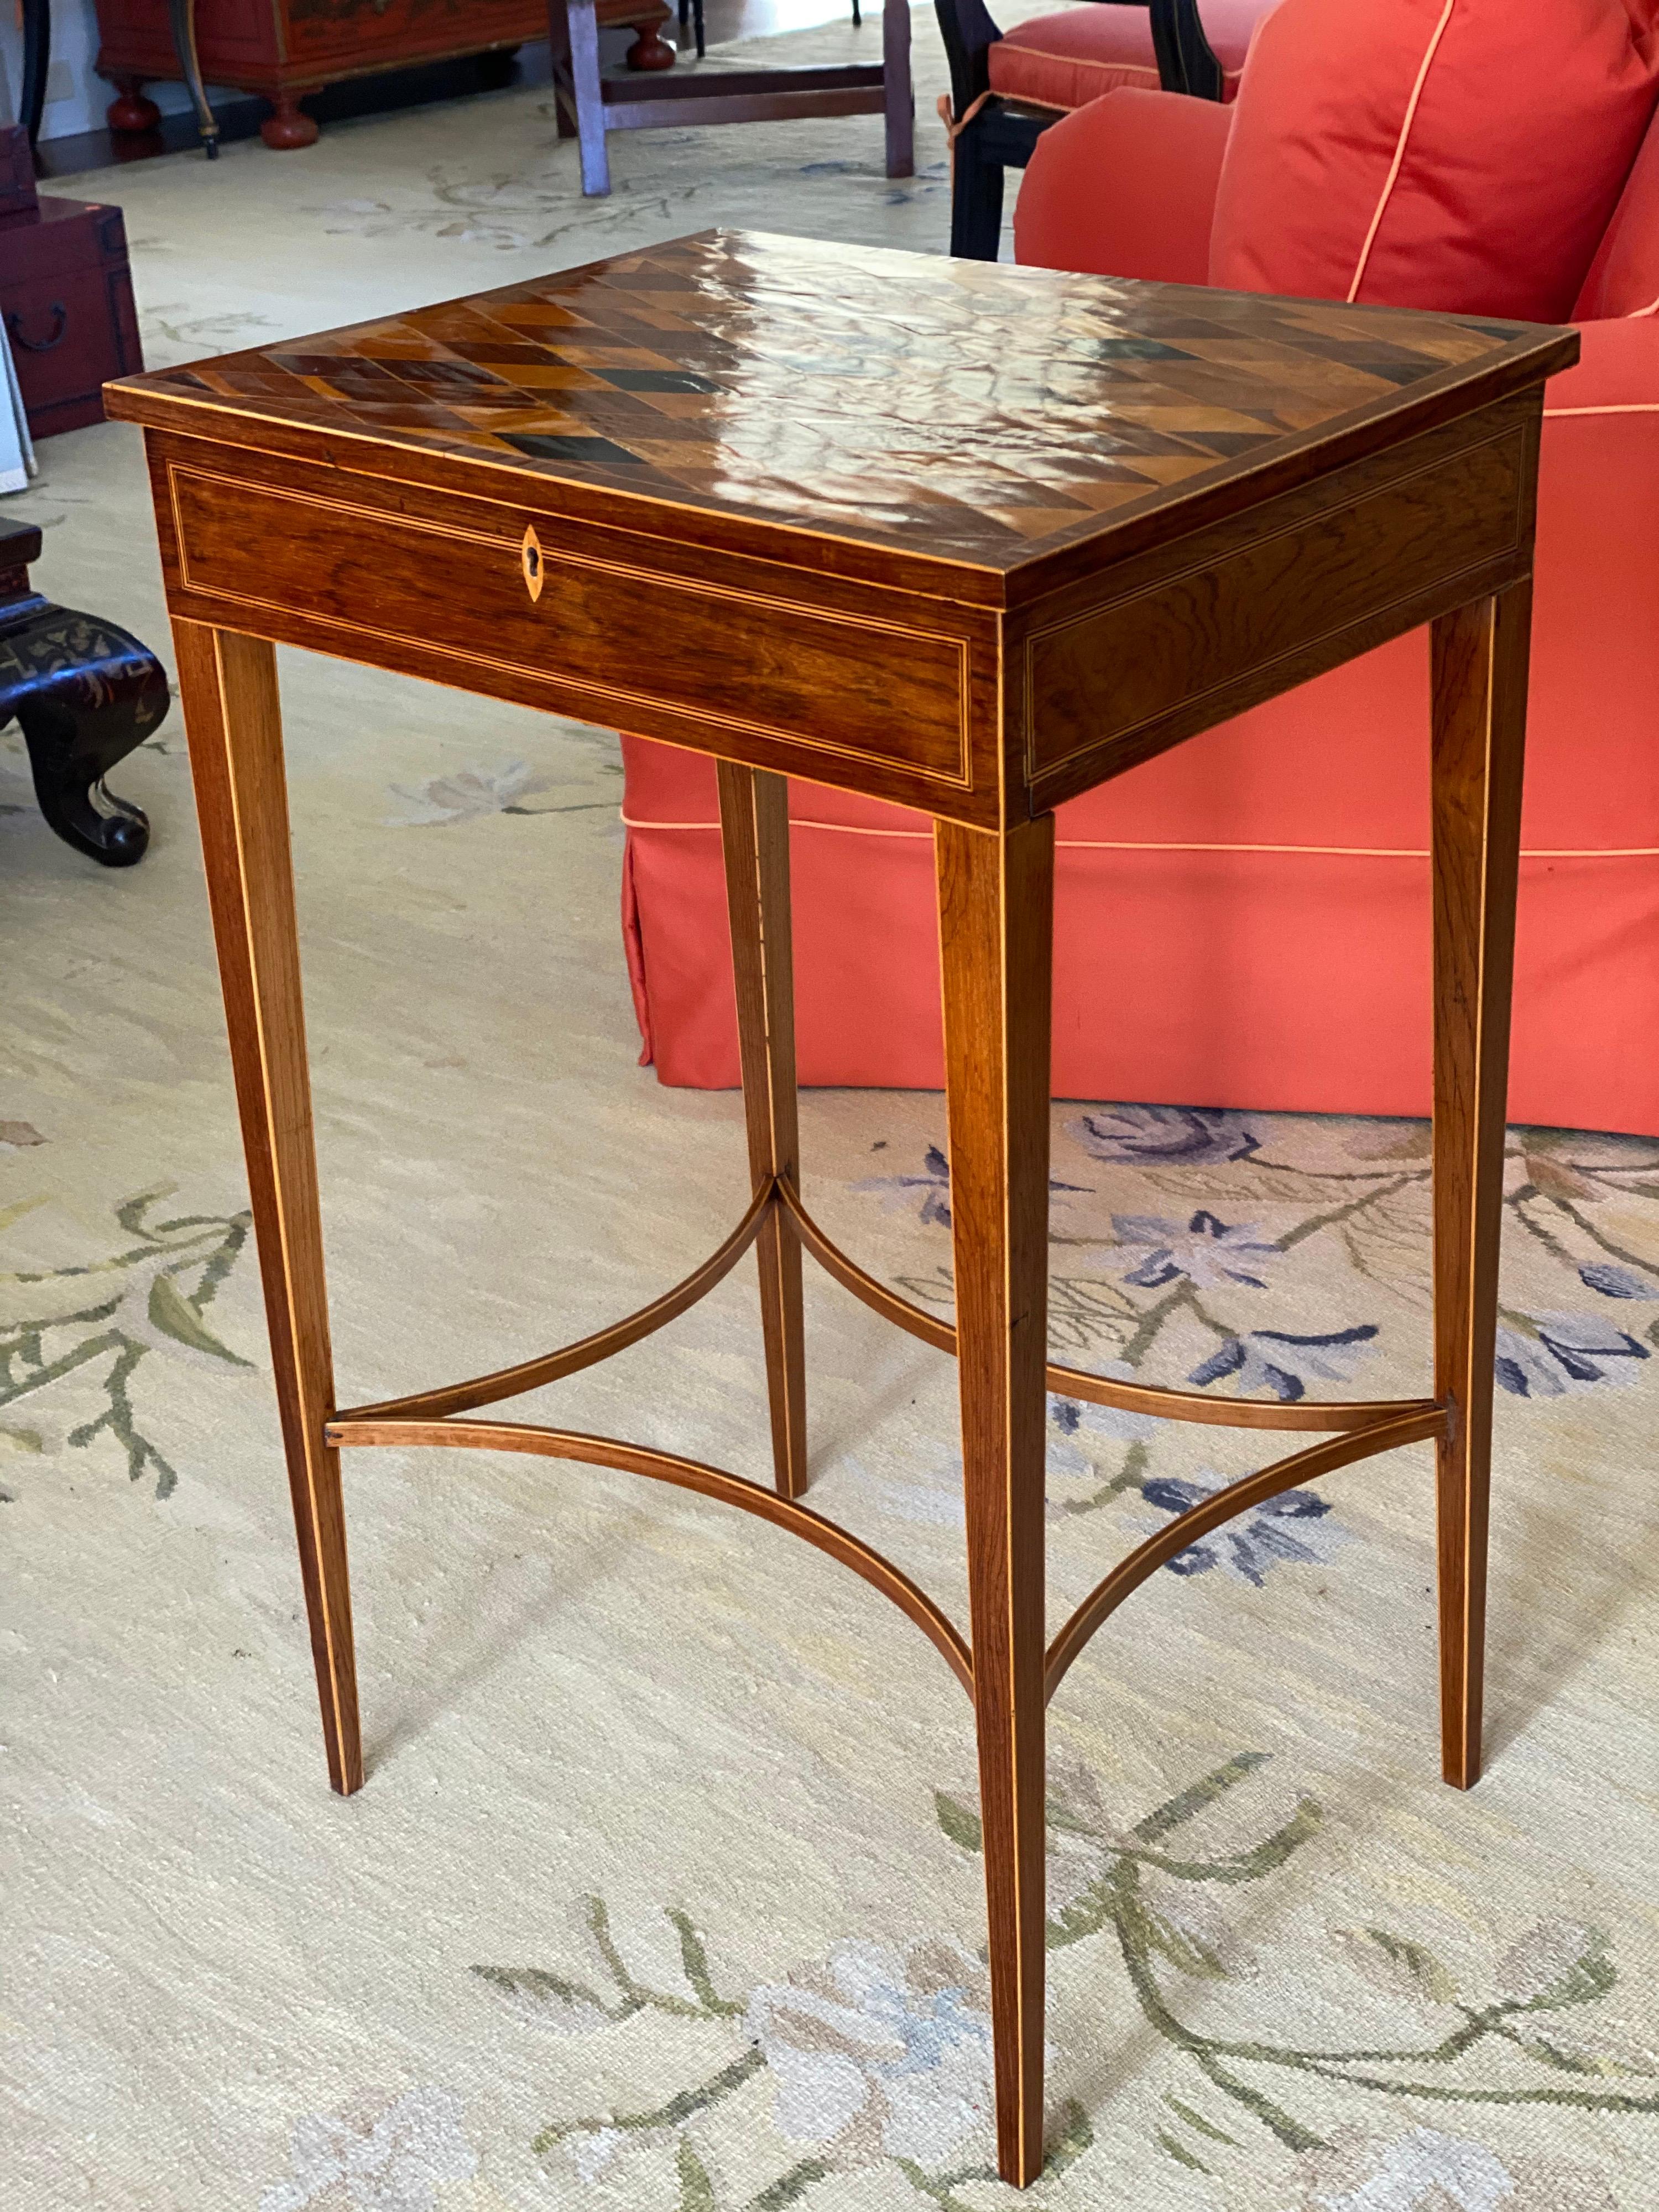 Unusual George III inlaid rosewood and specimen wood parquetry work table, circa 1800.
The hinged rectangular parquetry top inlaid with specimen woods in a lattice pattern and over a simulated frieze drawer fitted with a keyhole and raised on